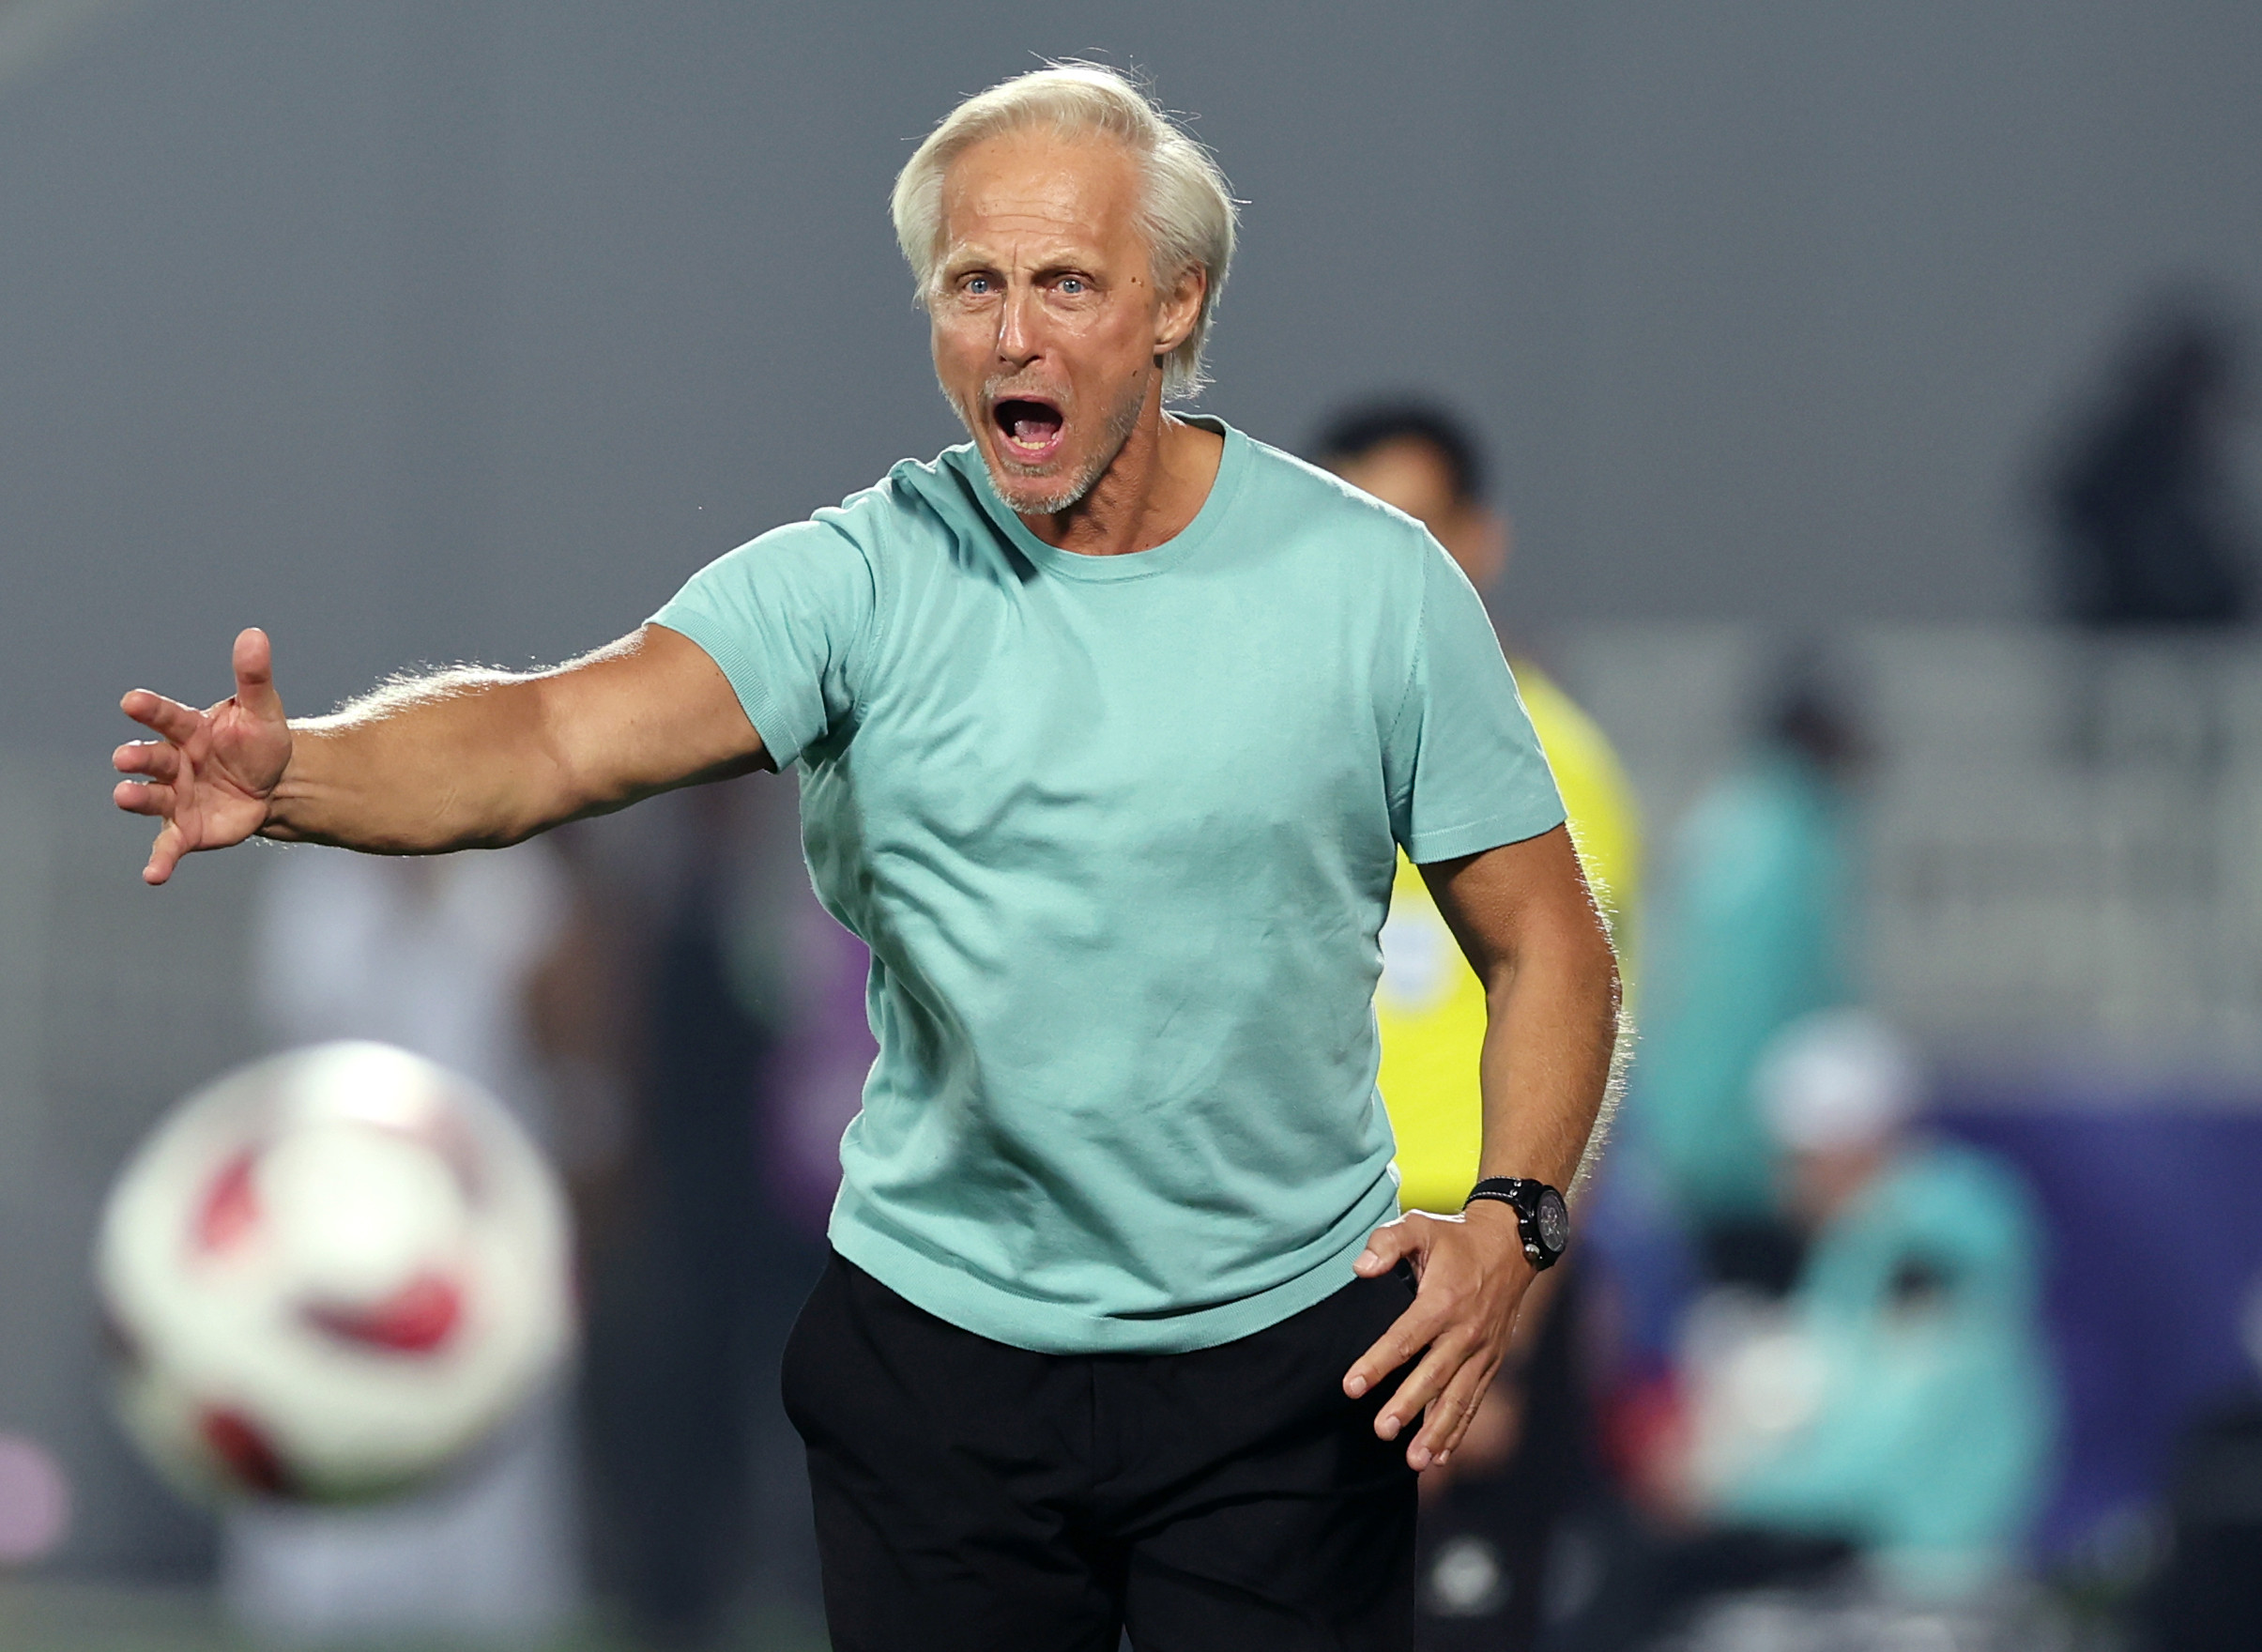 Hong Kong head coach Jorn Andersen’s missed his side’s training session Tuesday, amid speculation over his future. Photo: Xinhua